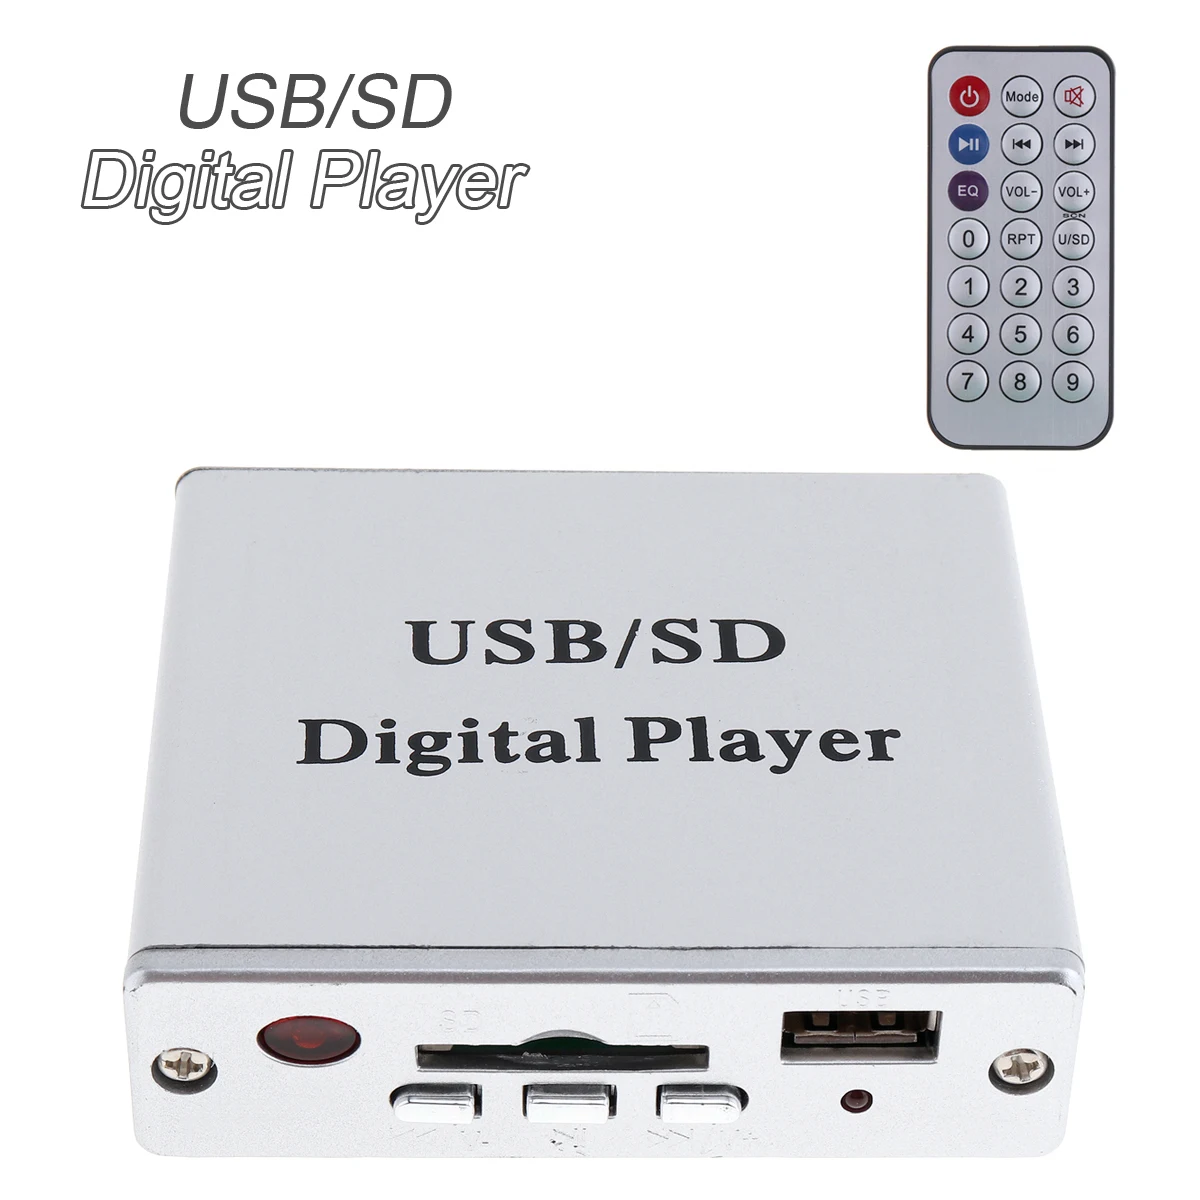 

DC 12V Power Amplifier MP3 SD USB Audio Player Reader 3 Electronic Keypad Control USB SD Digital Players with Remote Controller